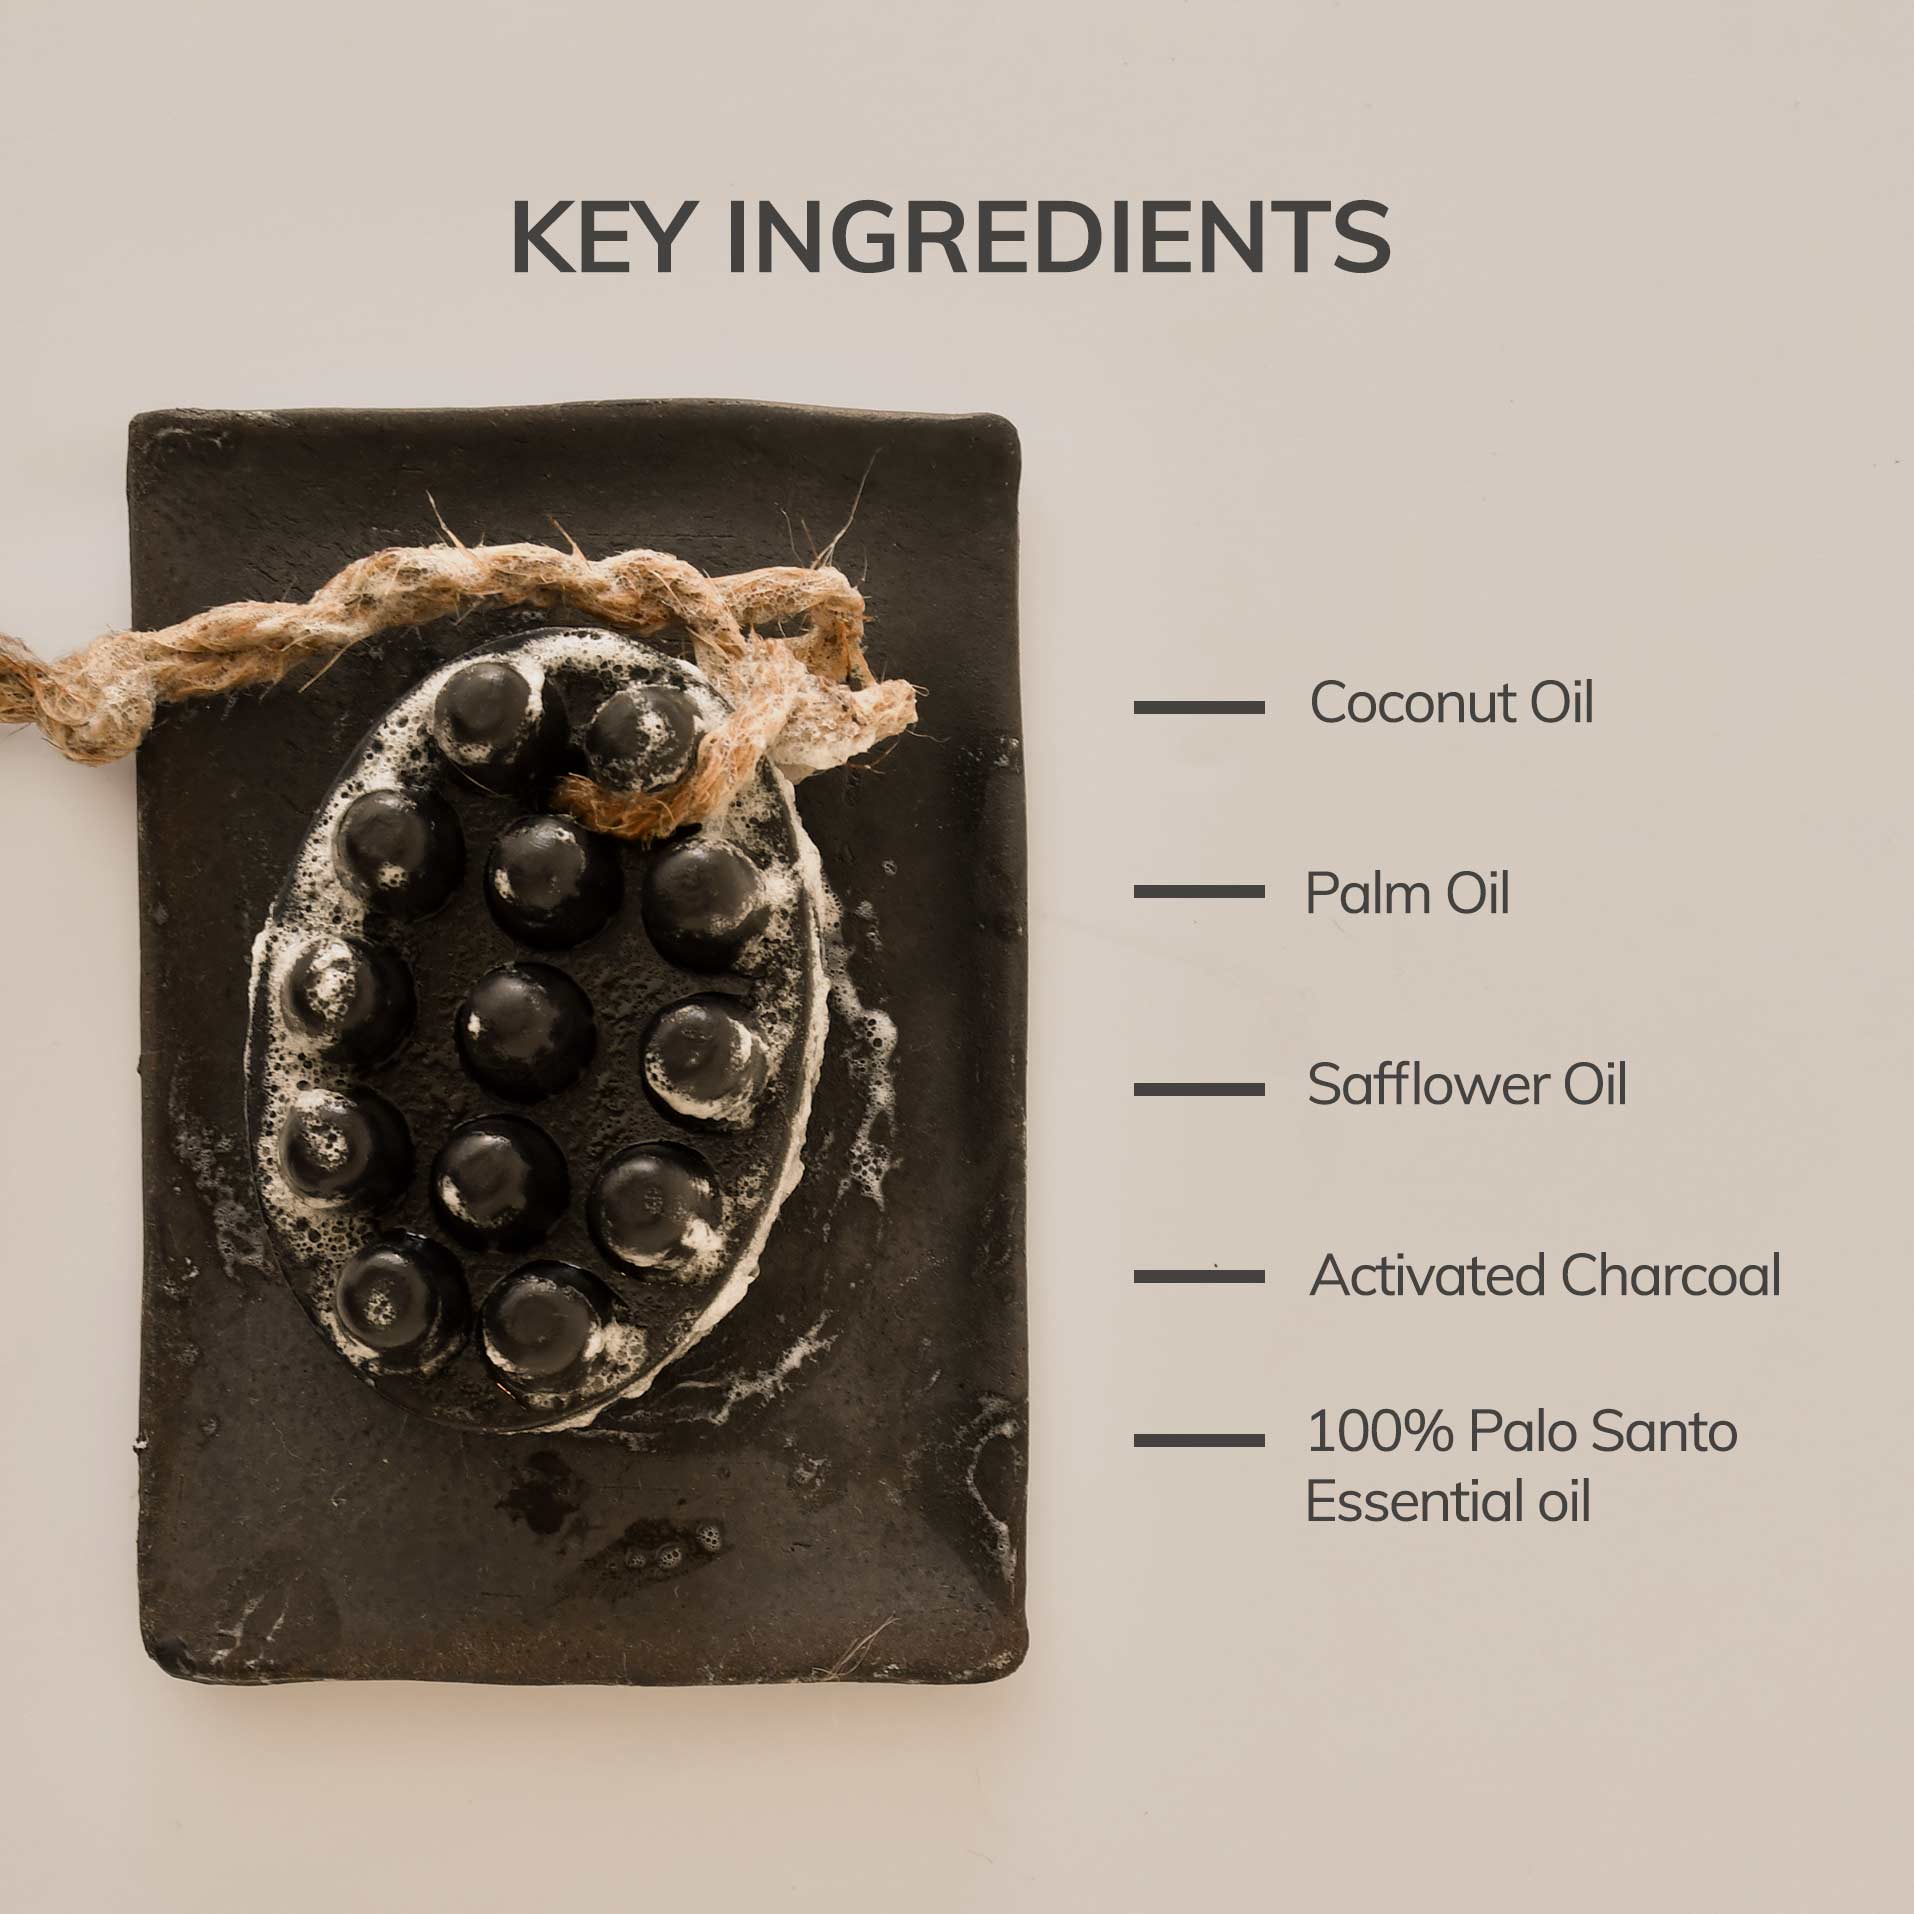 key ingredients of palo santo charcoal bar soap such as coconut oil, palm oil, safflower oil, activated charcoal, palo santo essential oil